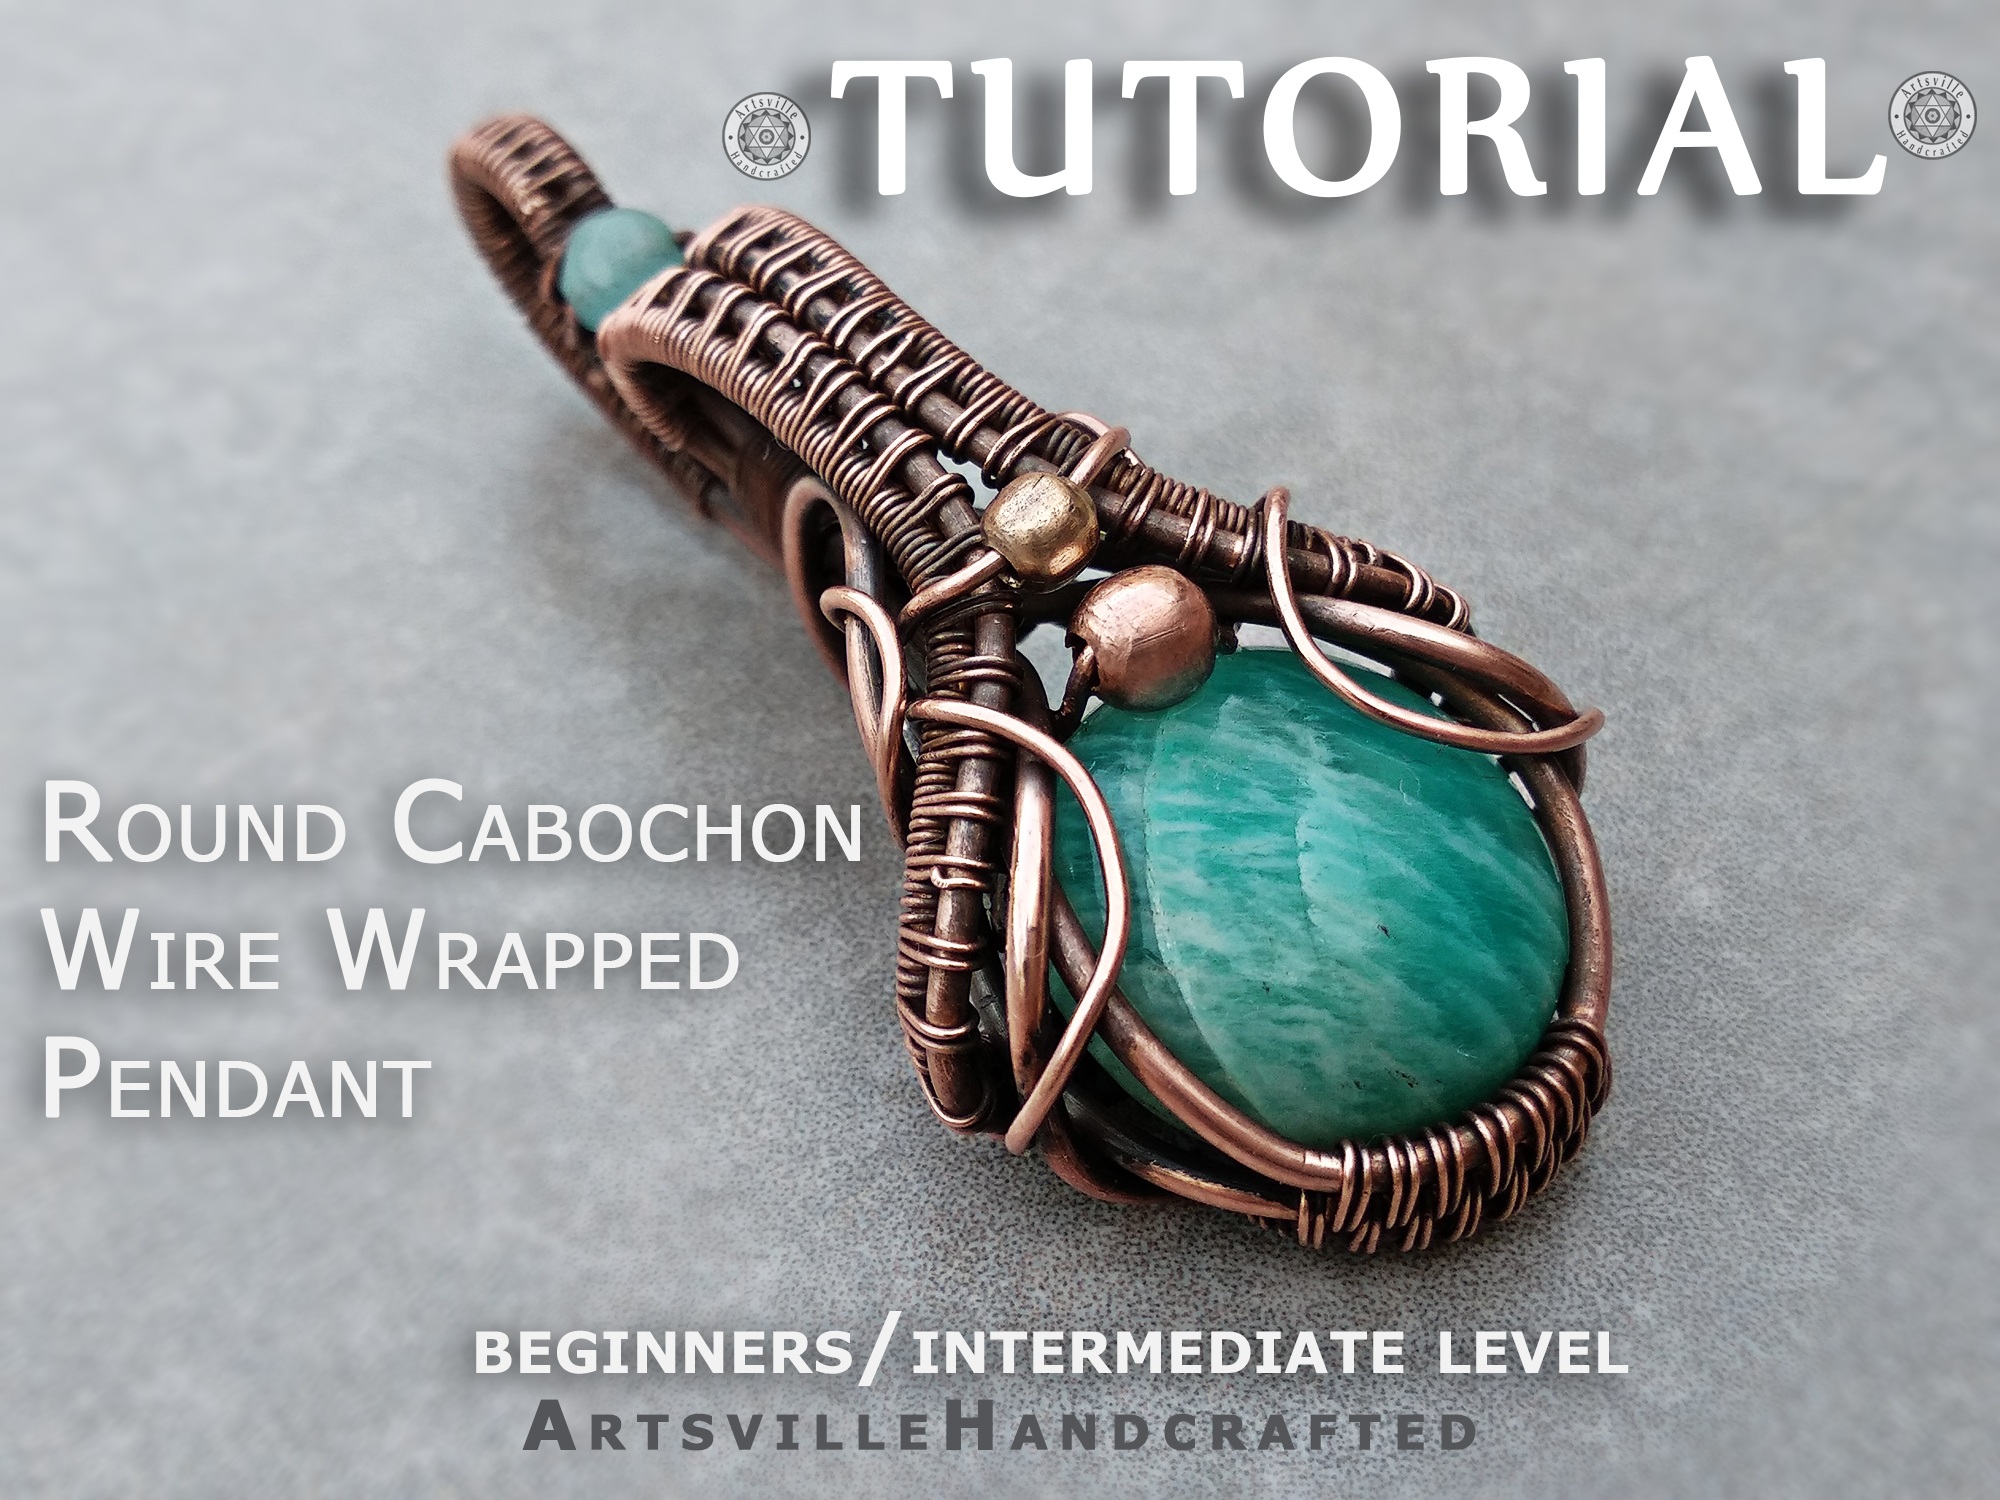 Wire wrapping PDF tutorial  Step by step wire jewelry making – Artarina